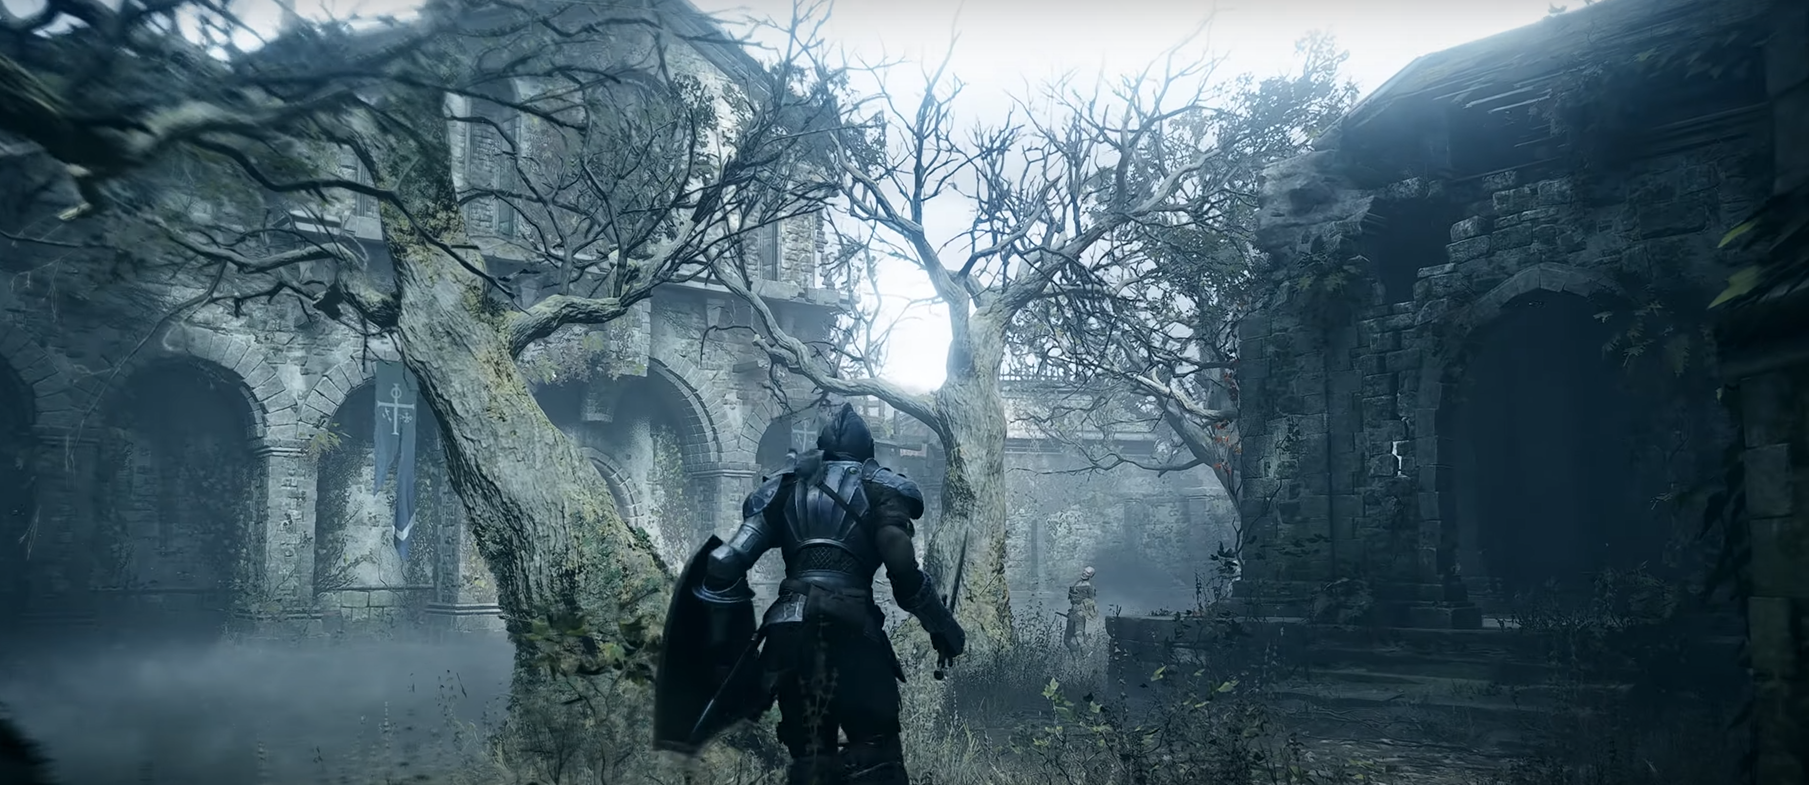 The PlayStation 5 'Demon's Souls' Remake Is Also Coming To PC [Updated]